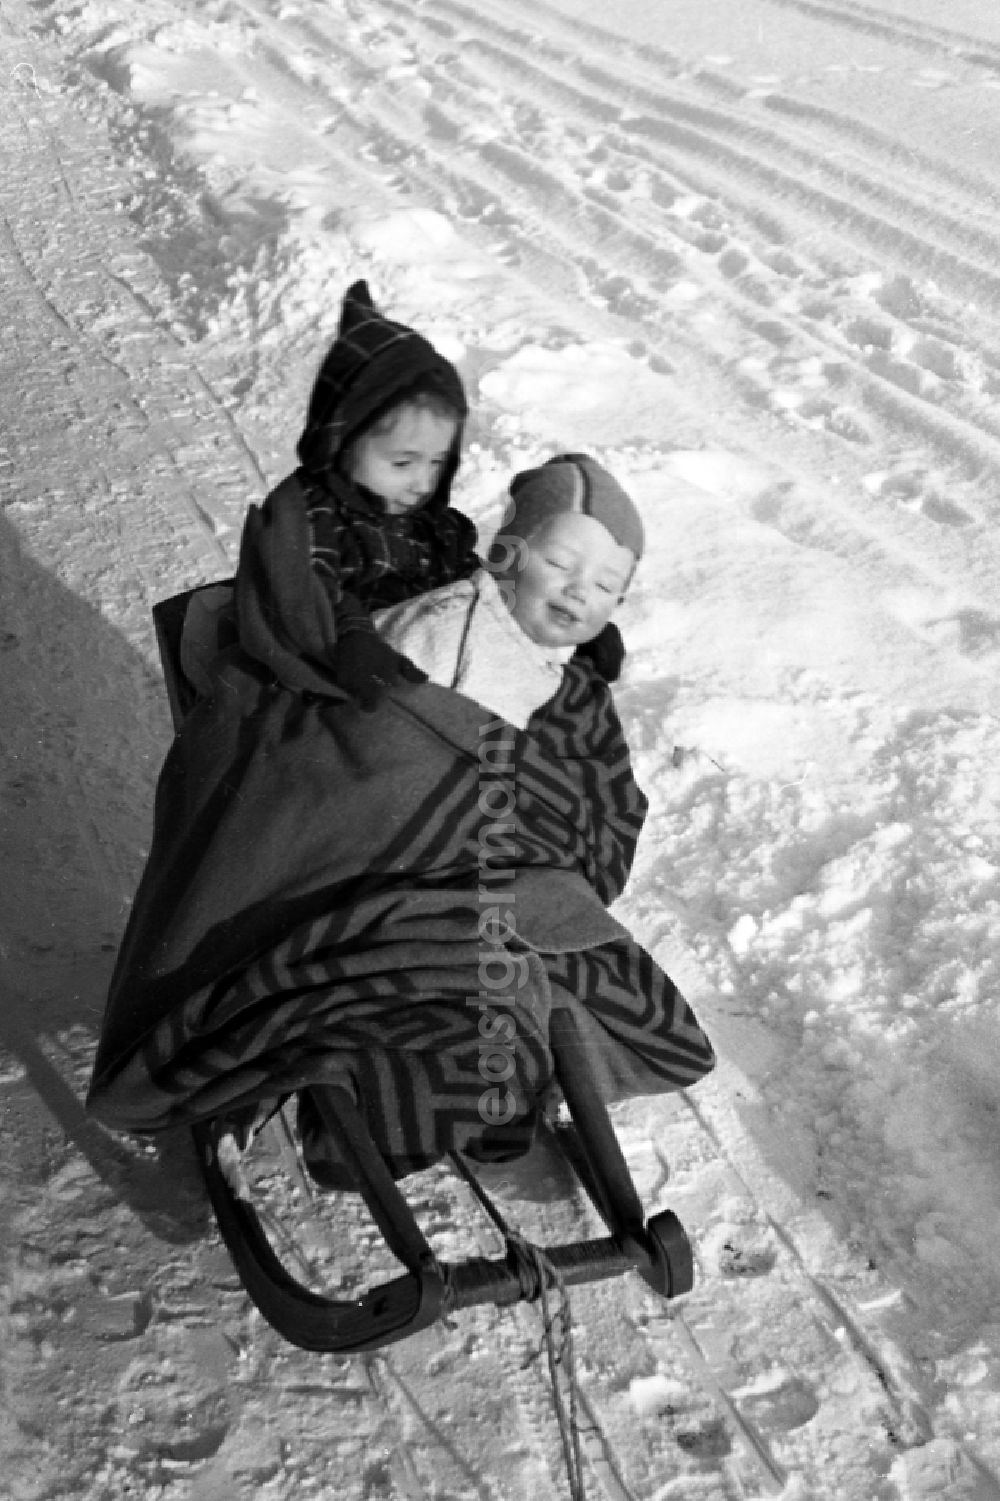 Merseburg: Two children lie, muffled in a thick cover, on a sledge in Merseburg in the federal state Saxony-Anhalt in Germany